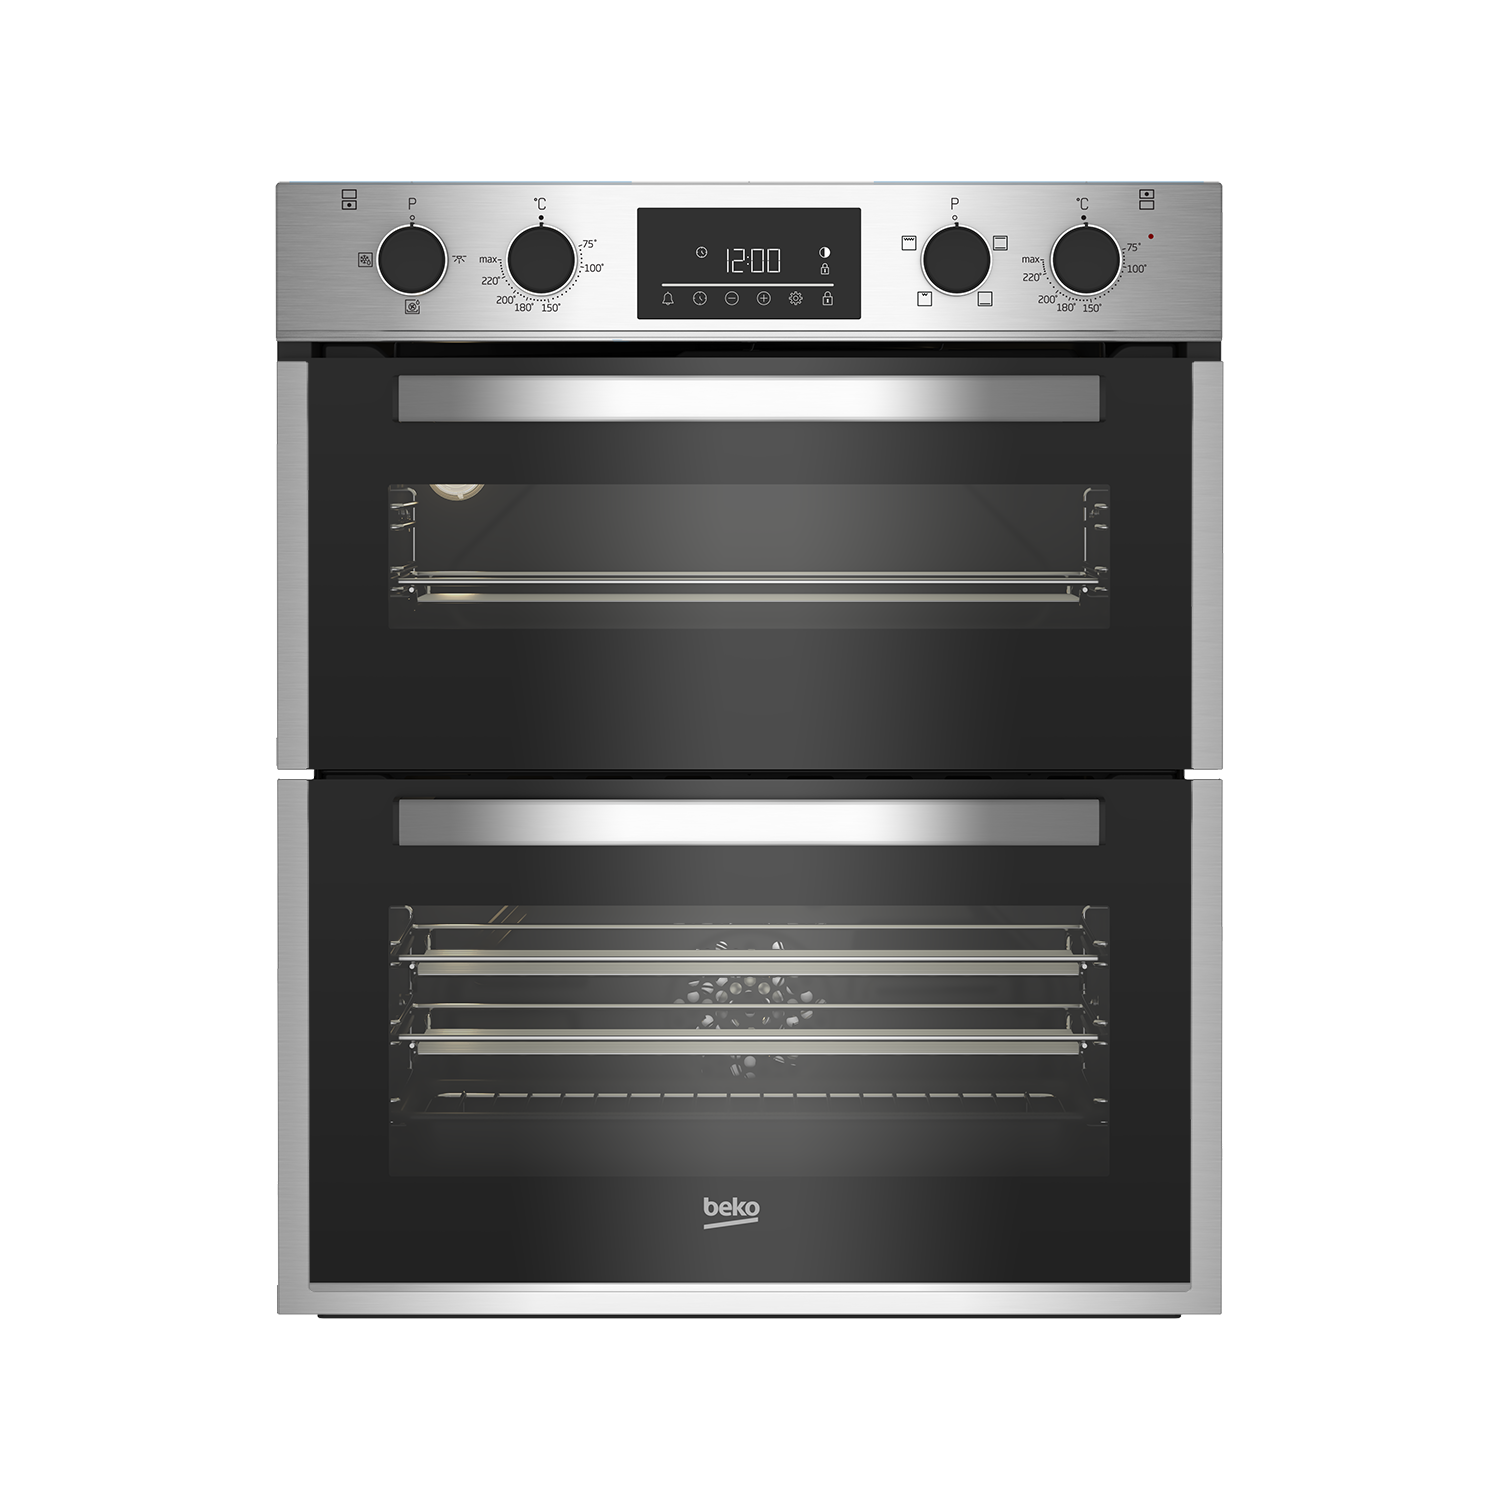 Refurbished Beko BBTF26300X Electric Built Under Double Oven - Stainless Steel